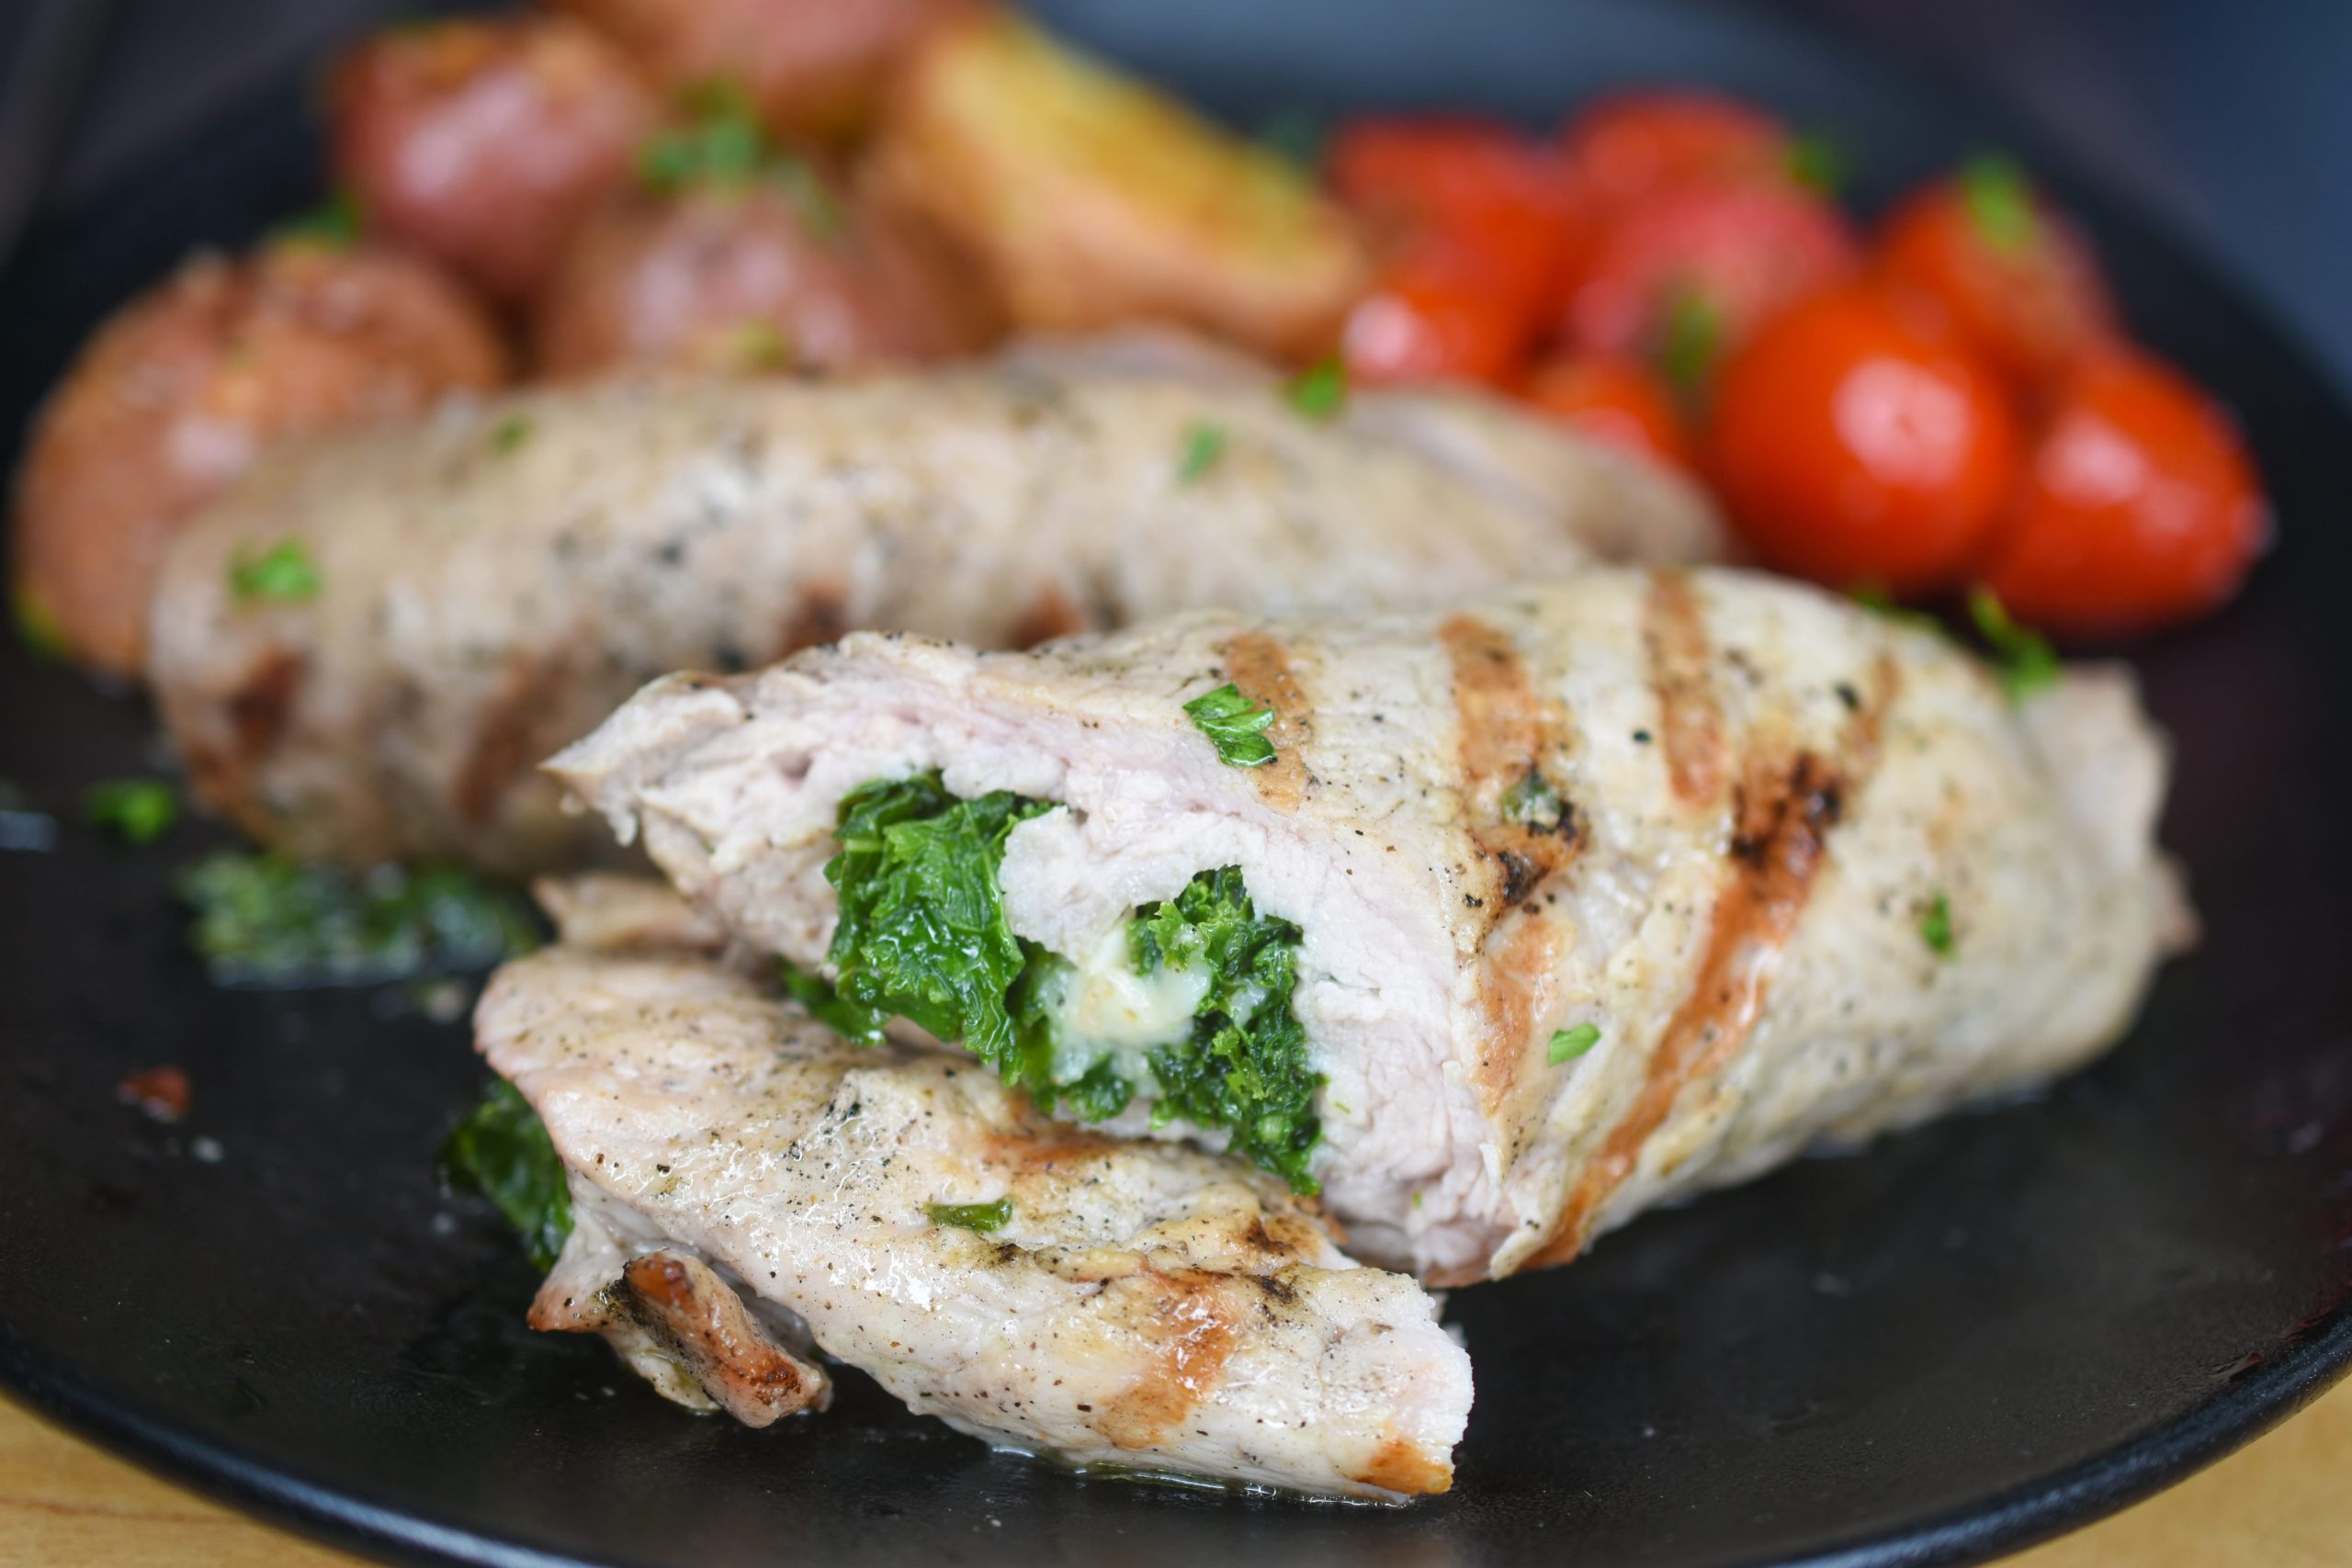 Veal Cutlets are stuffed with cheese and spinach and grilled to perfection leaving grilled marks and a delicious flavor, served with tomatoes, and red tomatoes.